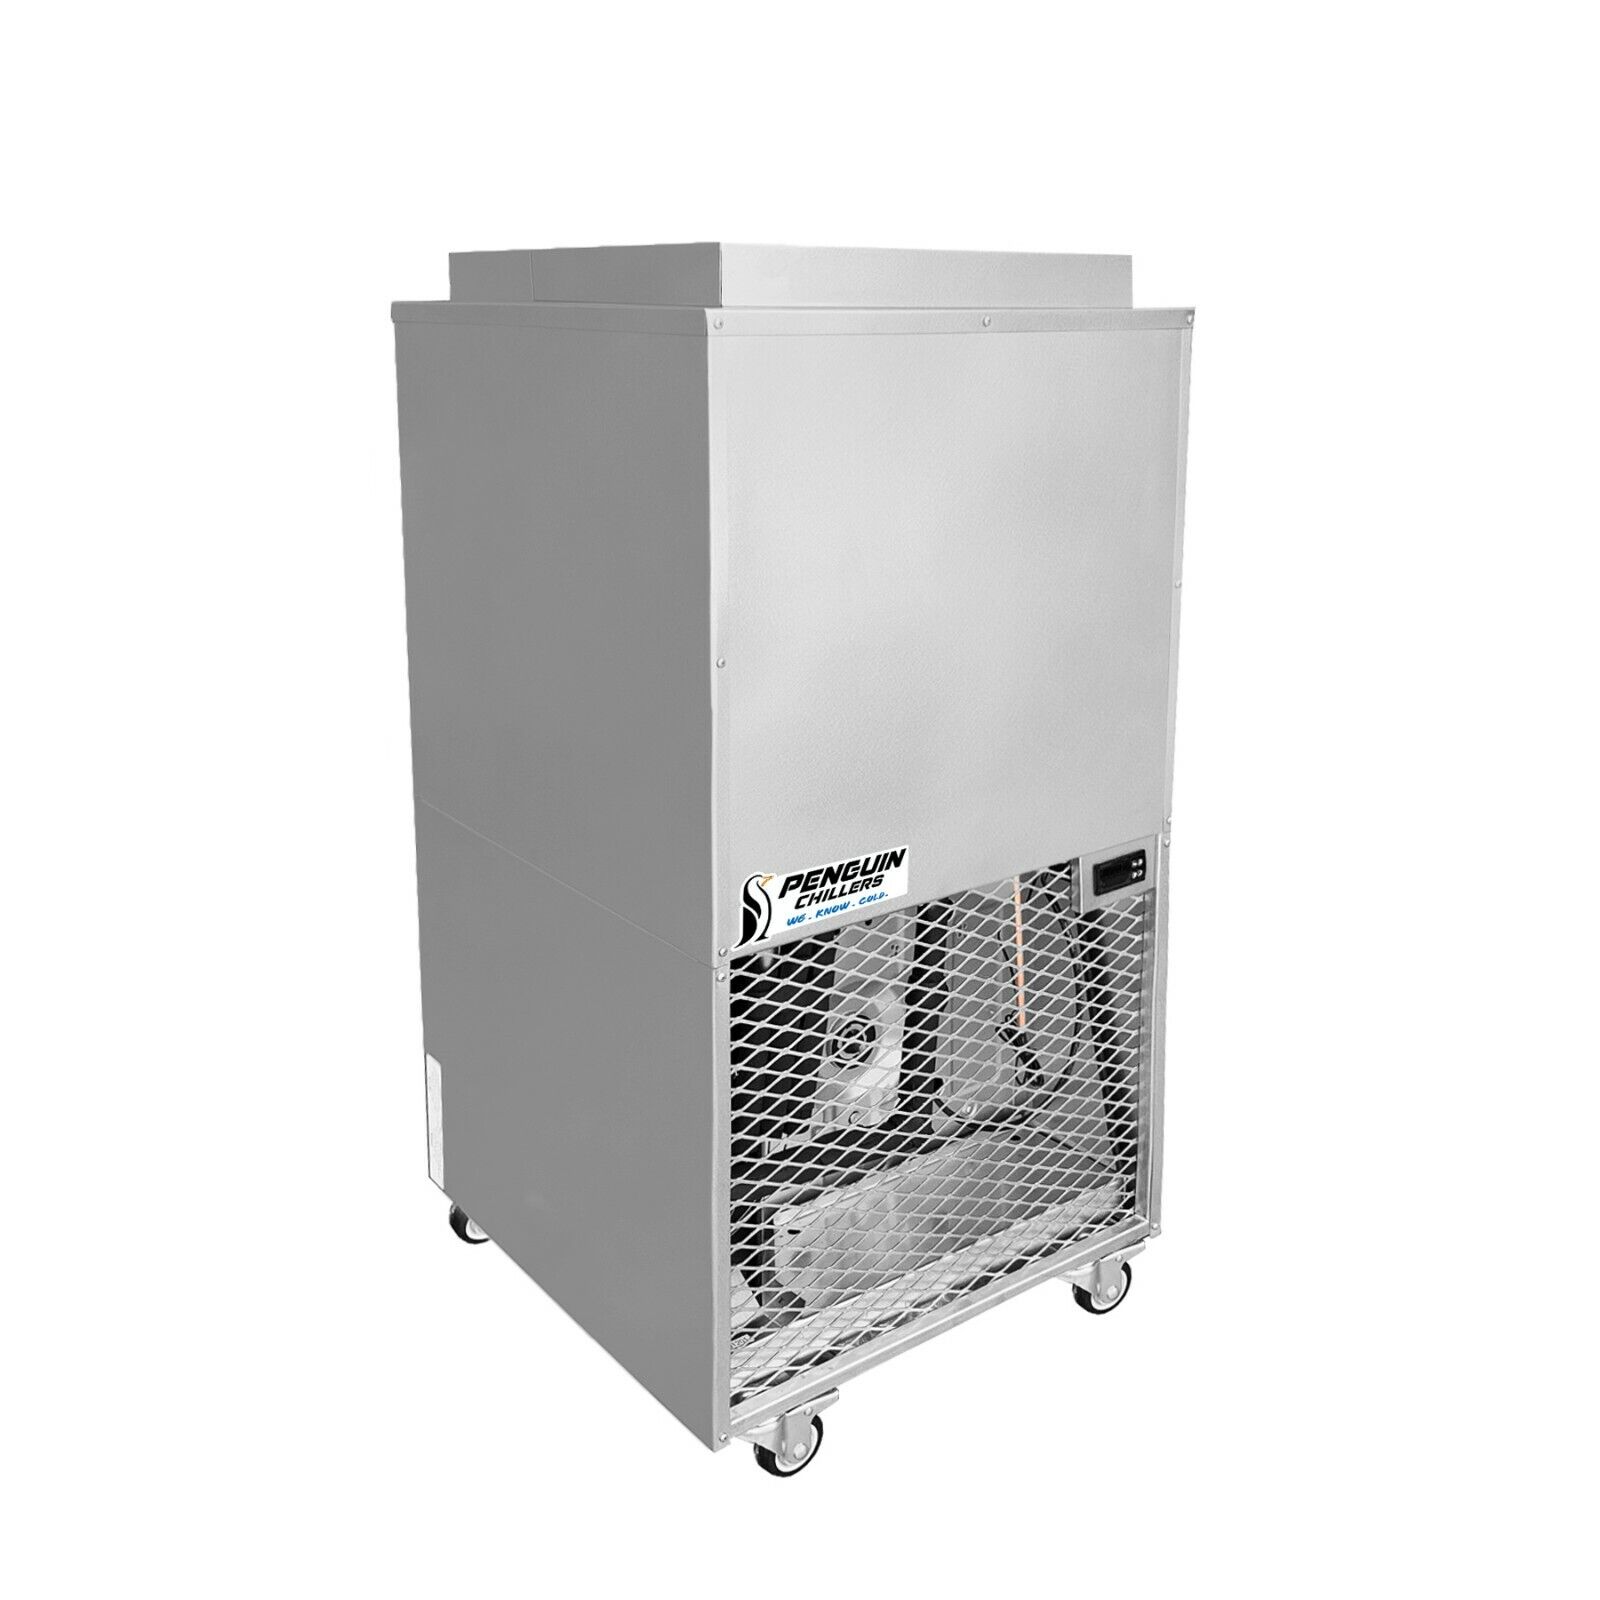 Brand New 2 HP Stainless Steel Glycol XL Chiller - Penguin Chillers